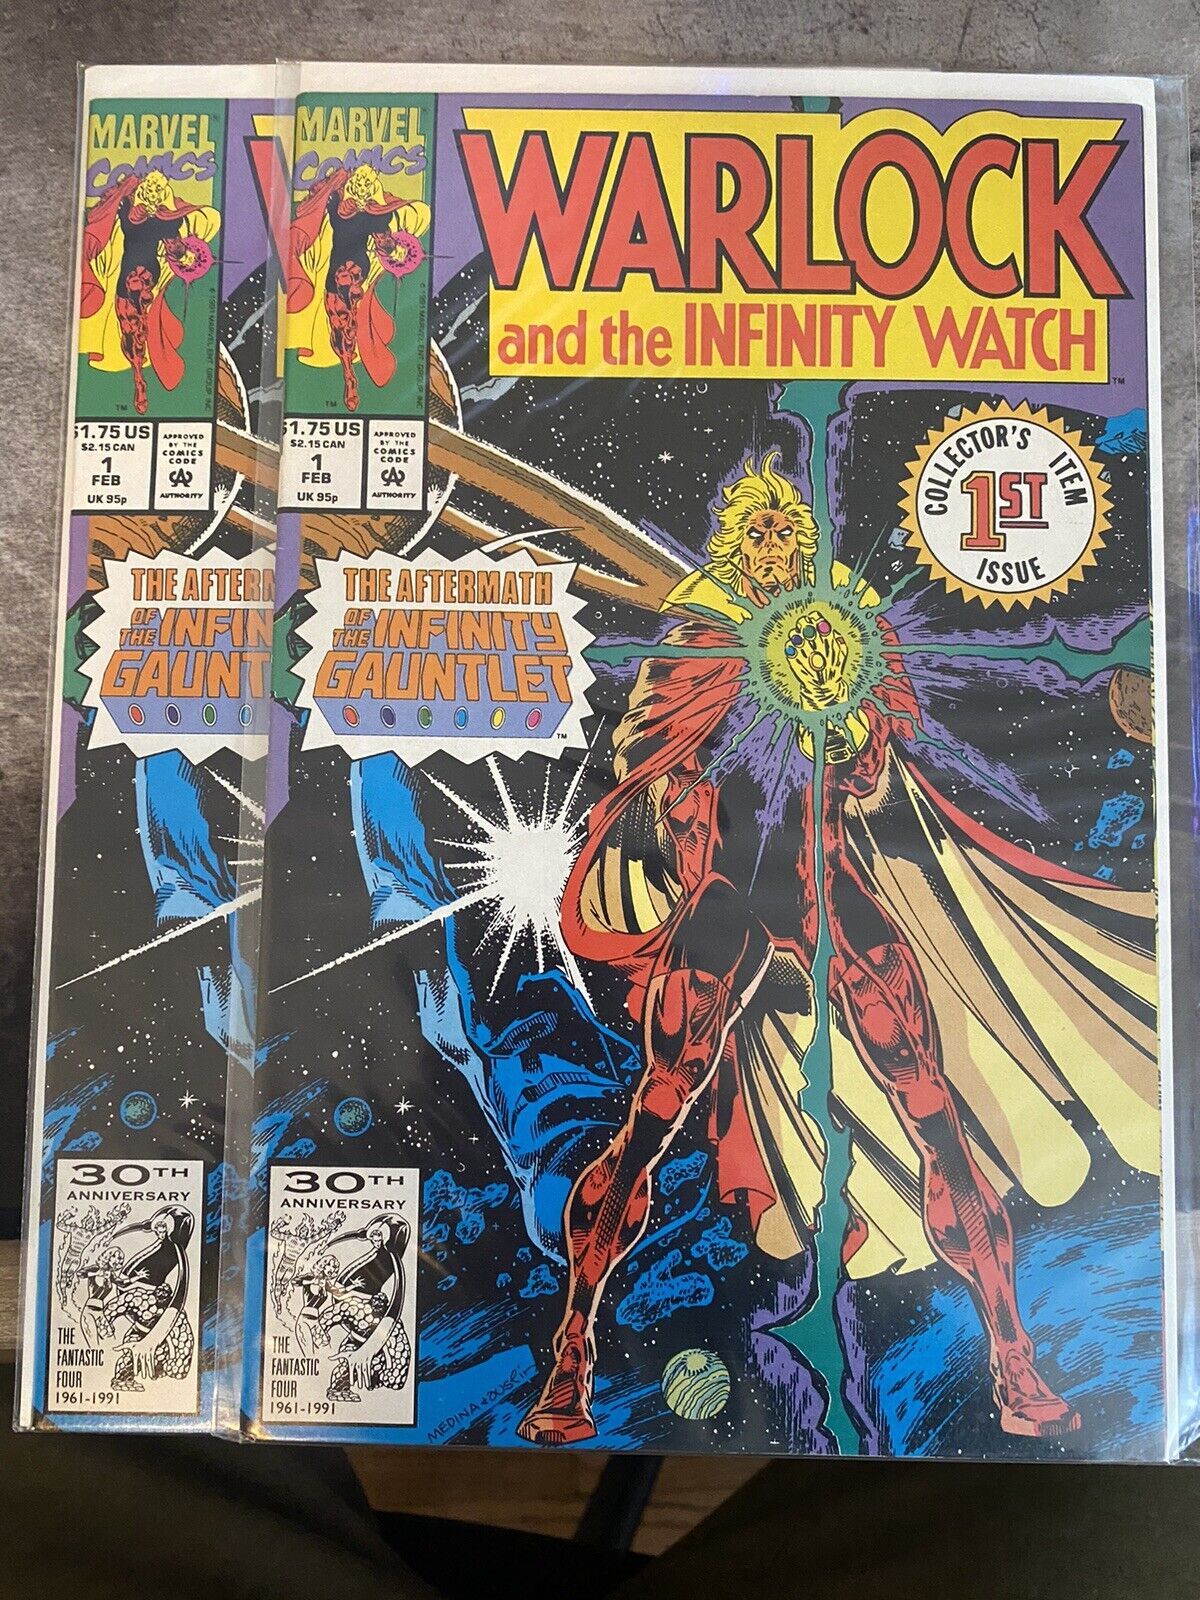 Warlock and the Infinity Watch #1 VF/NM